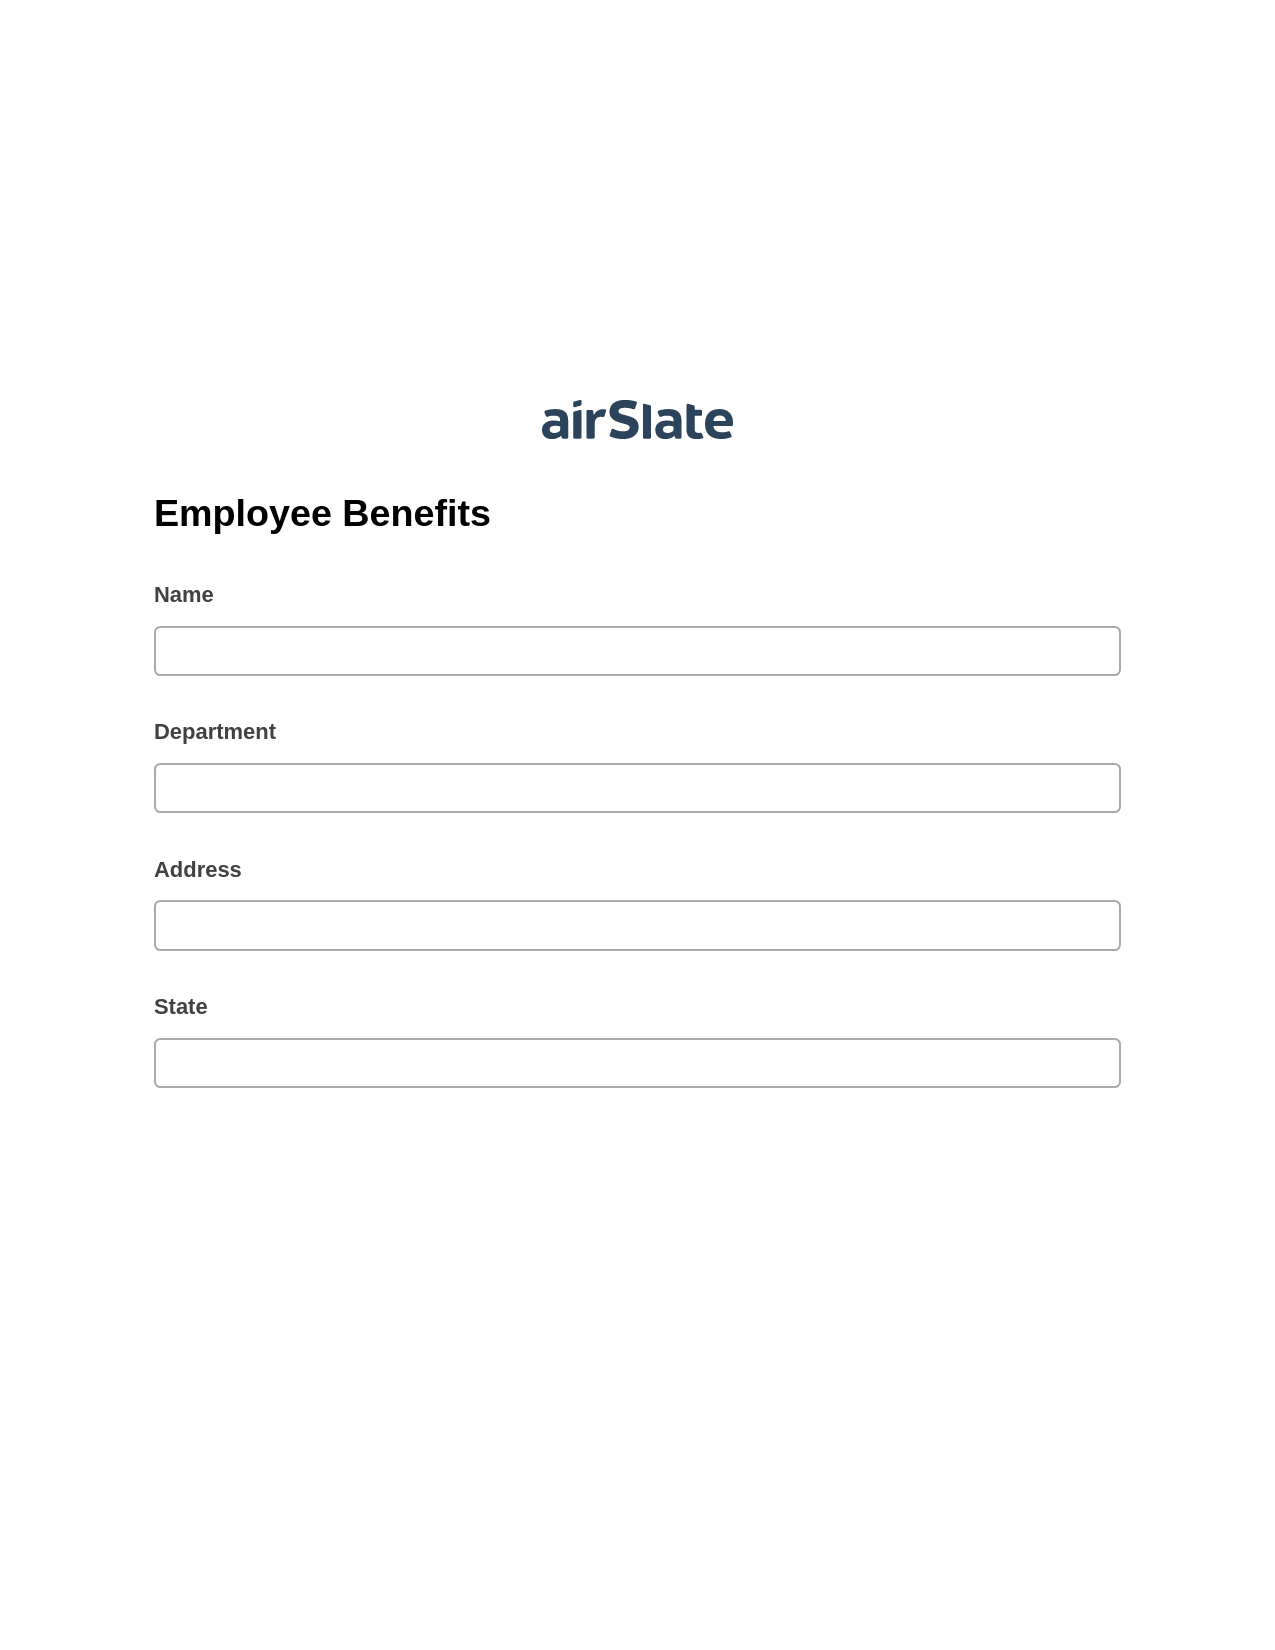 Employee Benefits Pre-fill Slate from MS Dynamics 365 Records Bot, System Bot - Create a Slate in another Flow, OneDrive Bot